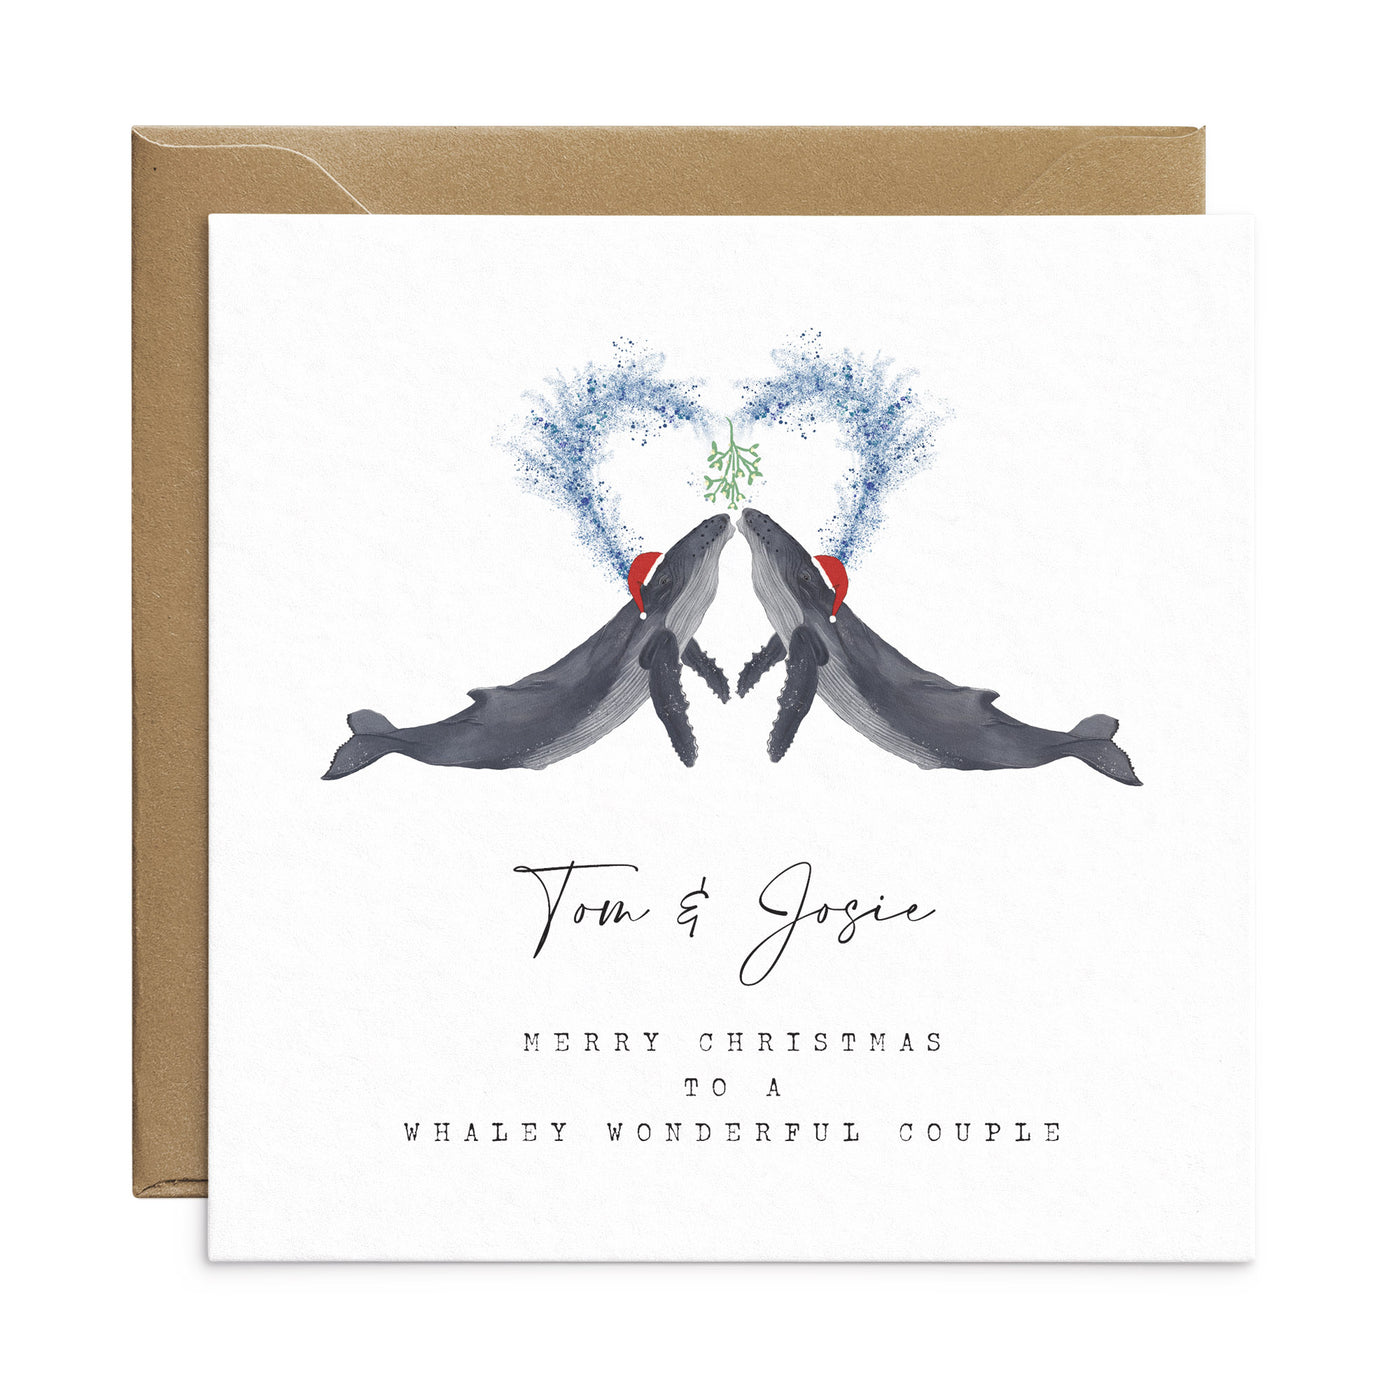 Personalised Couples Christmas Card - Whaley Wonderful Couple